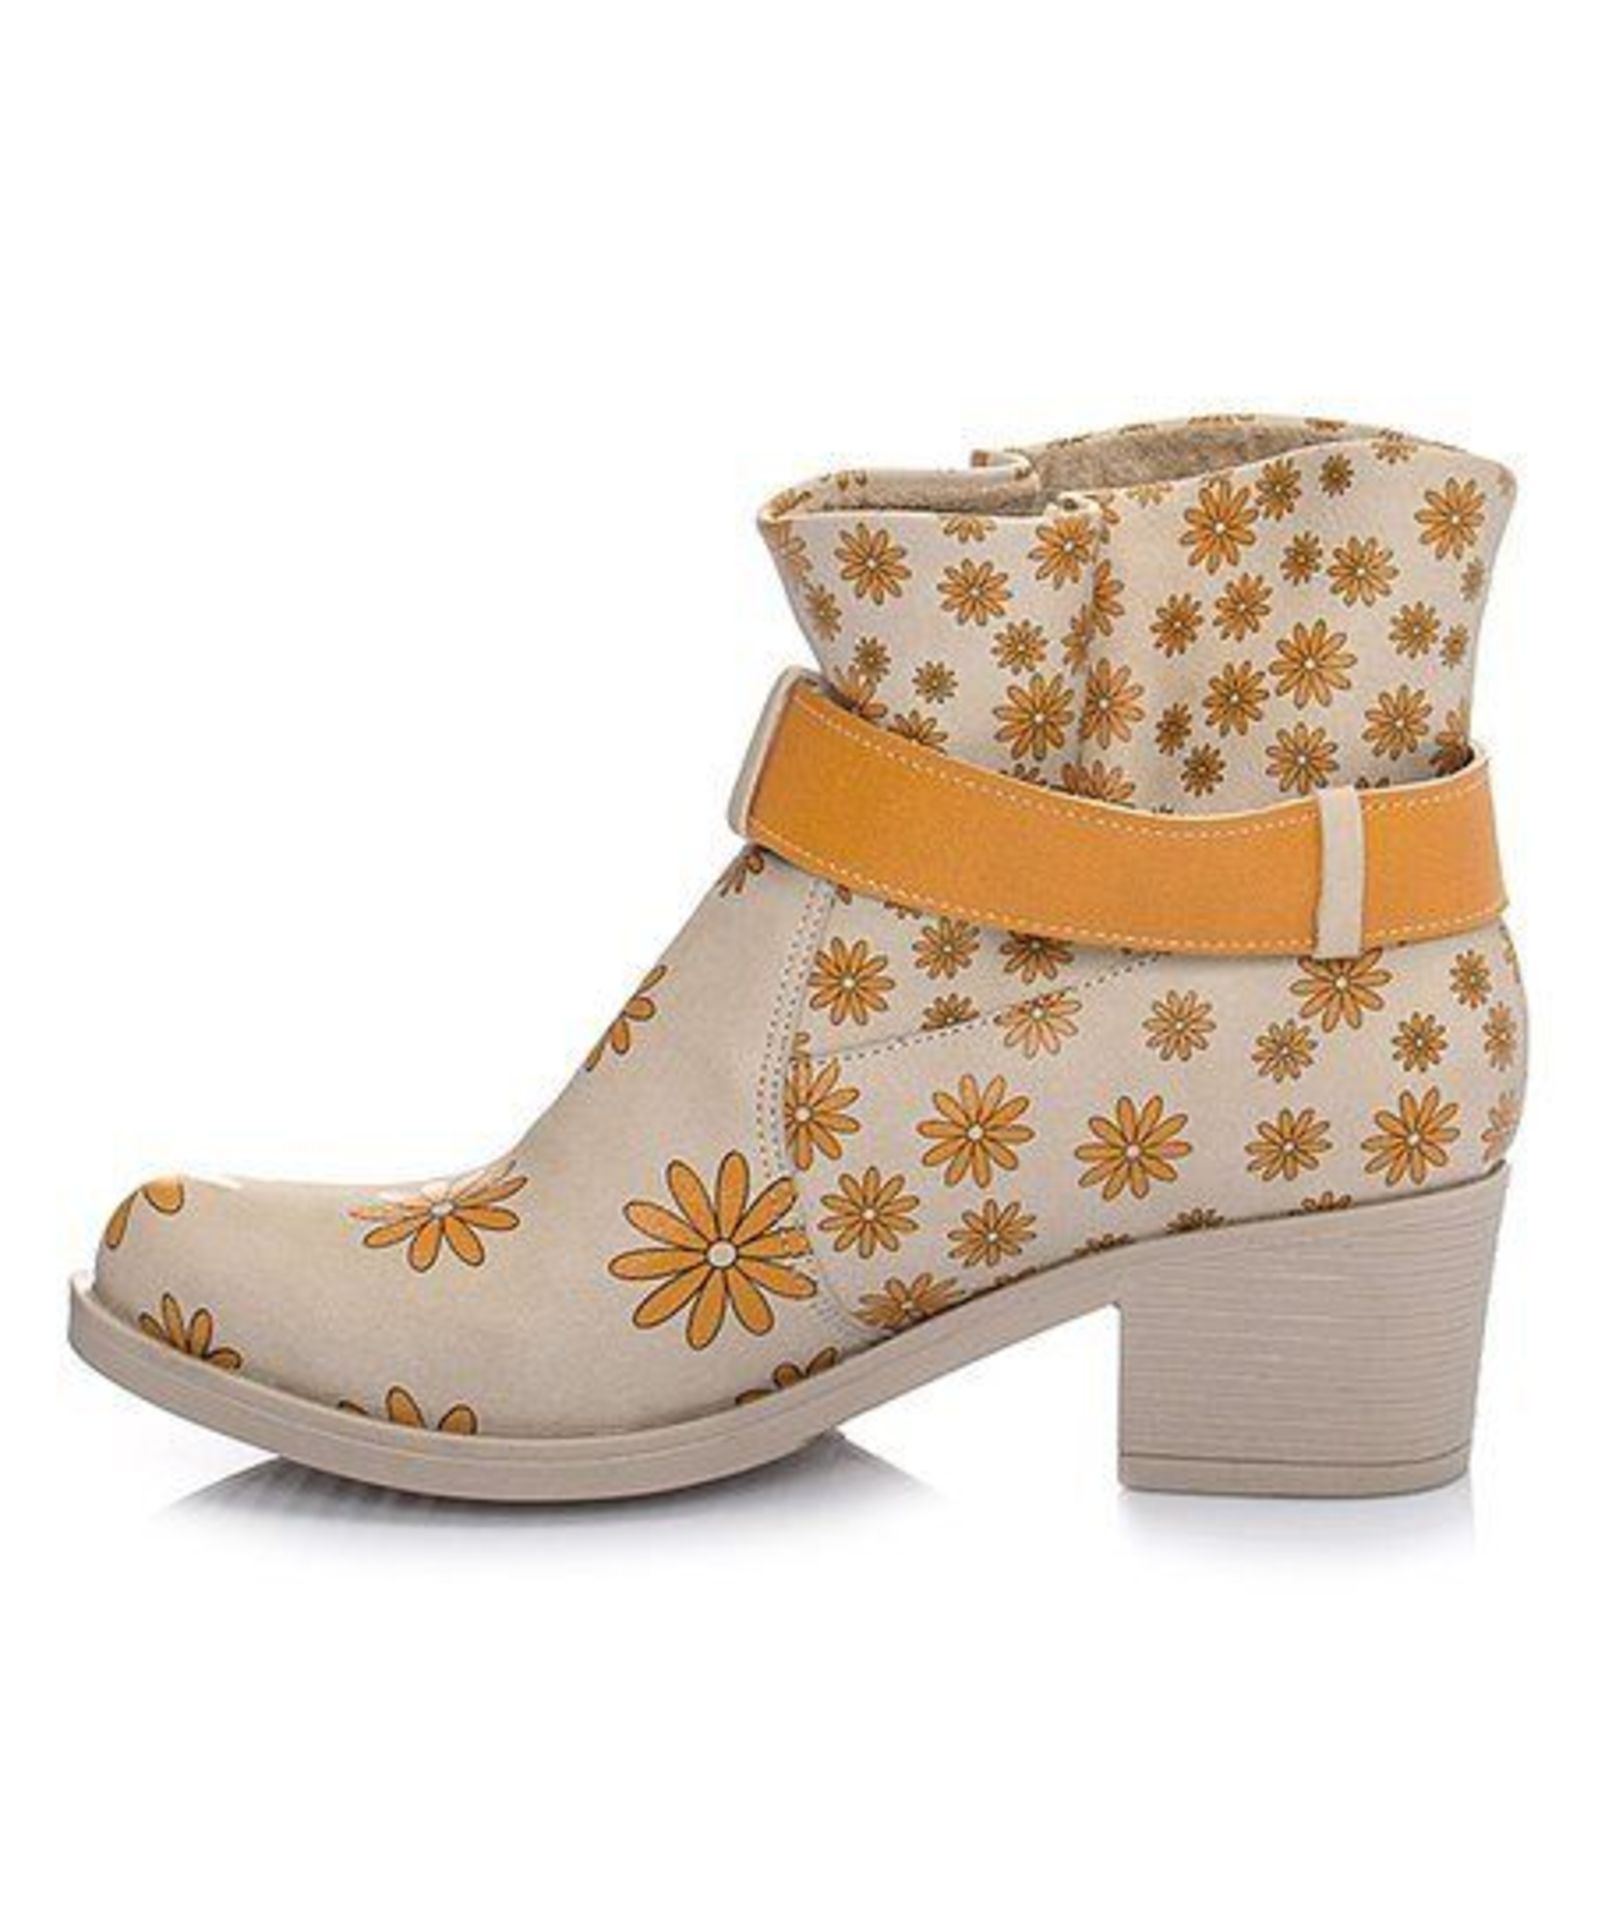 Calory Yellow & Beige Daisy Bootie (Uk Size:7/Euro Size:40) (New With Box) [Ref: 50727710-F-003] - Image 4 of 5